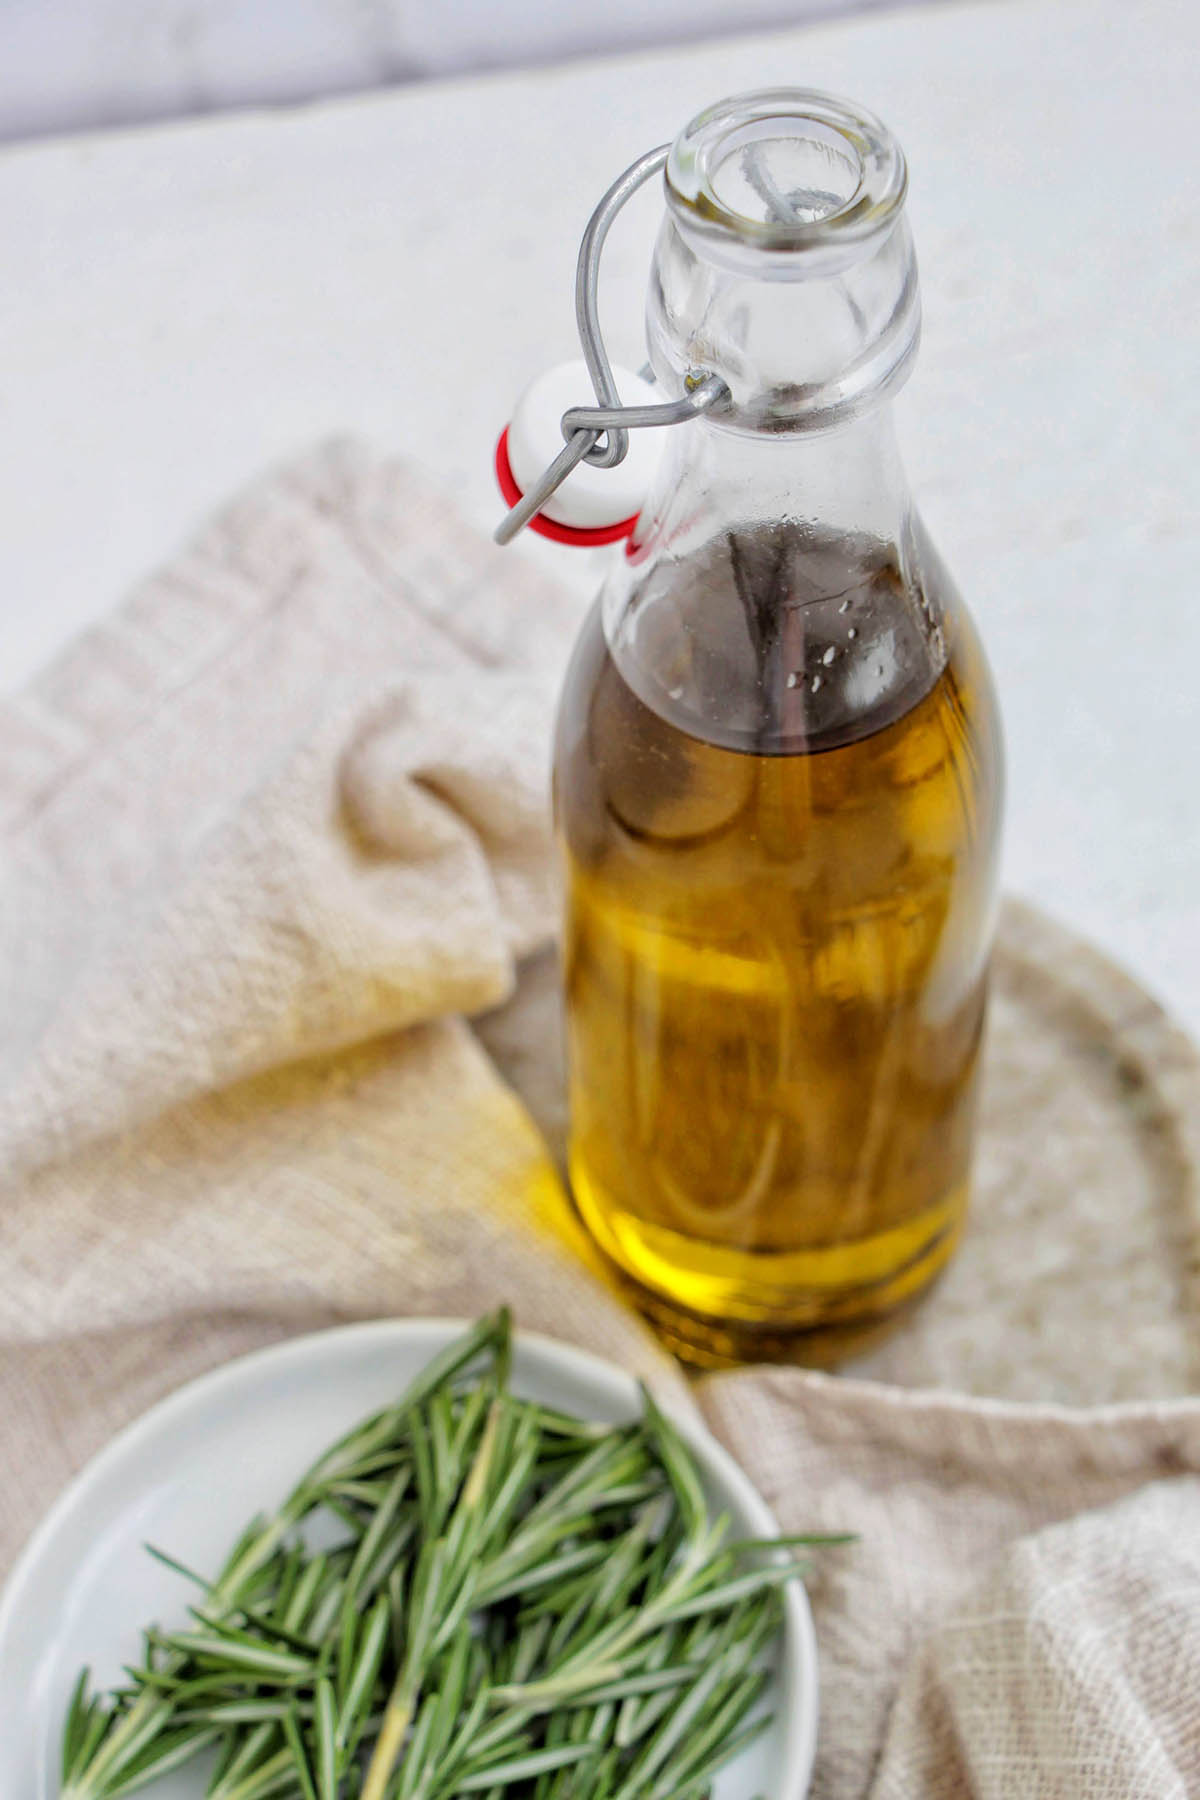 rosemary olive oil in a glass jar next to a plate of rosemary.